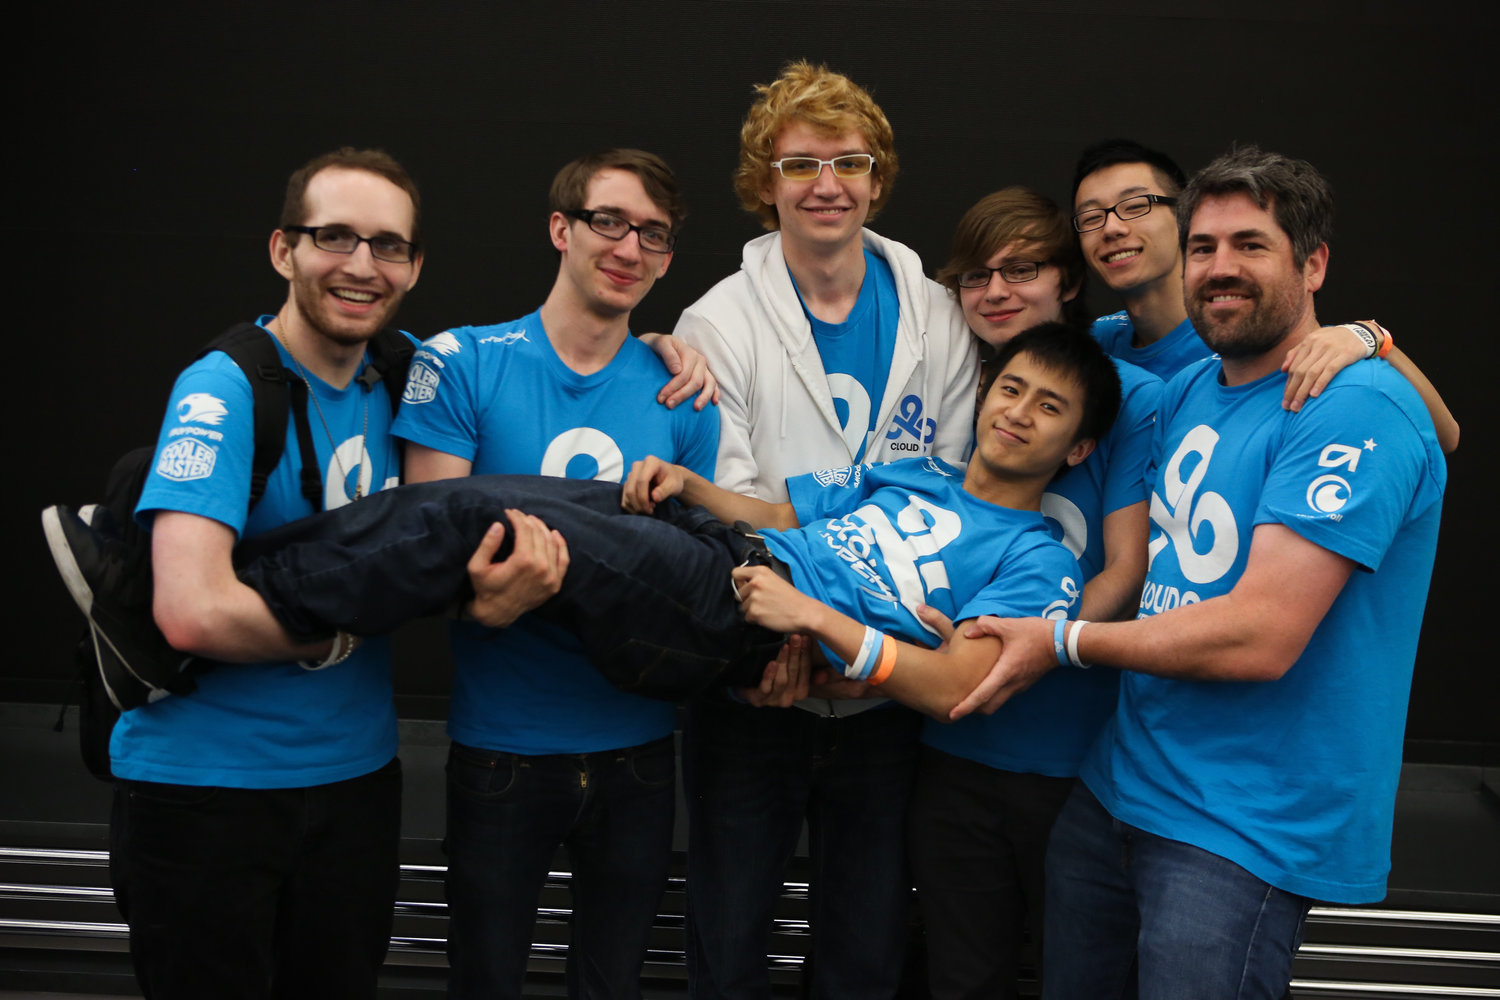 The history and formation of Cloud 9 - Part 1 of the Cloud 9 story